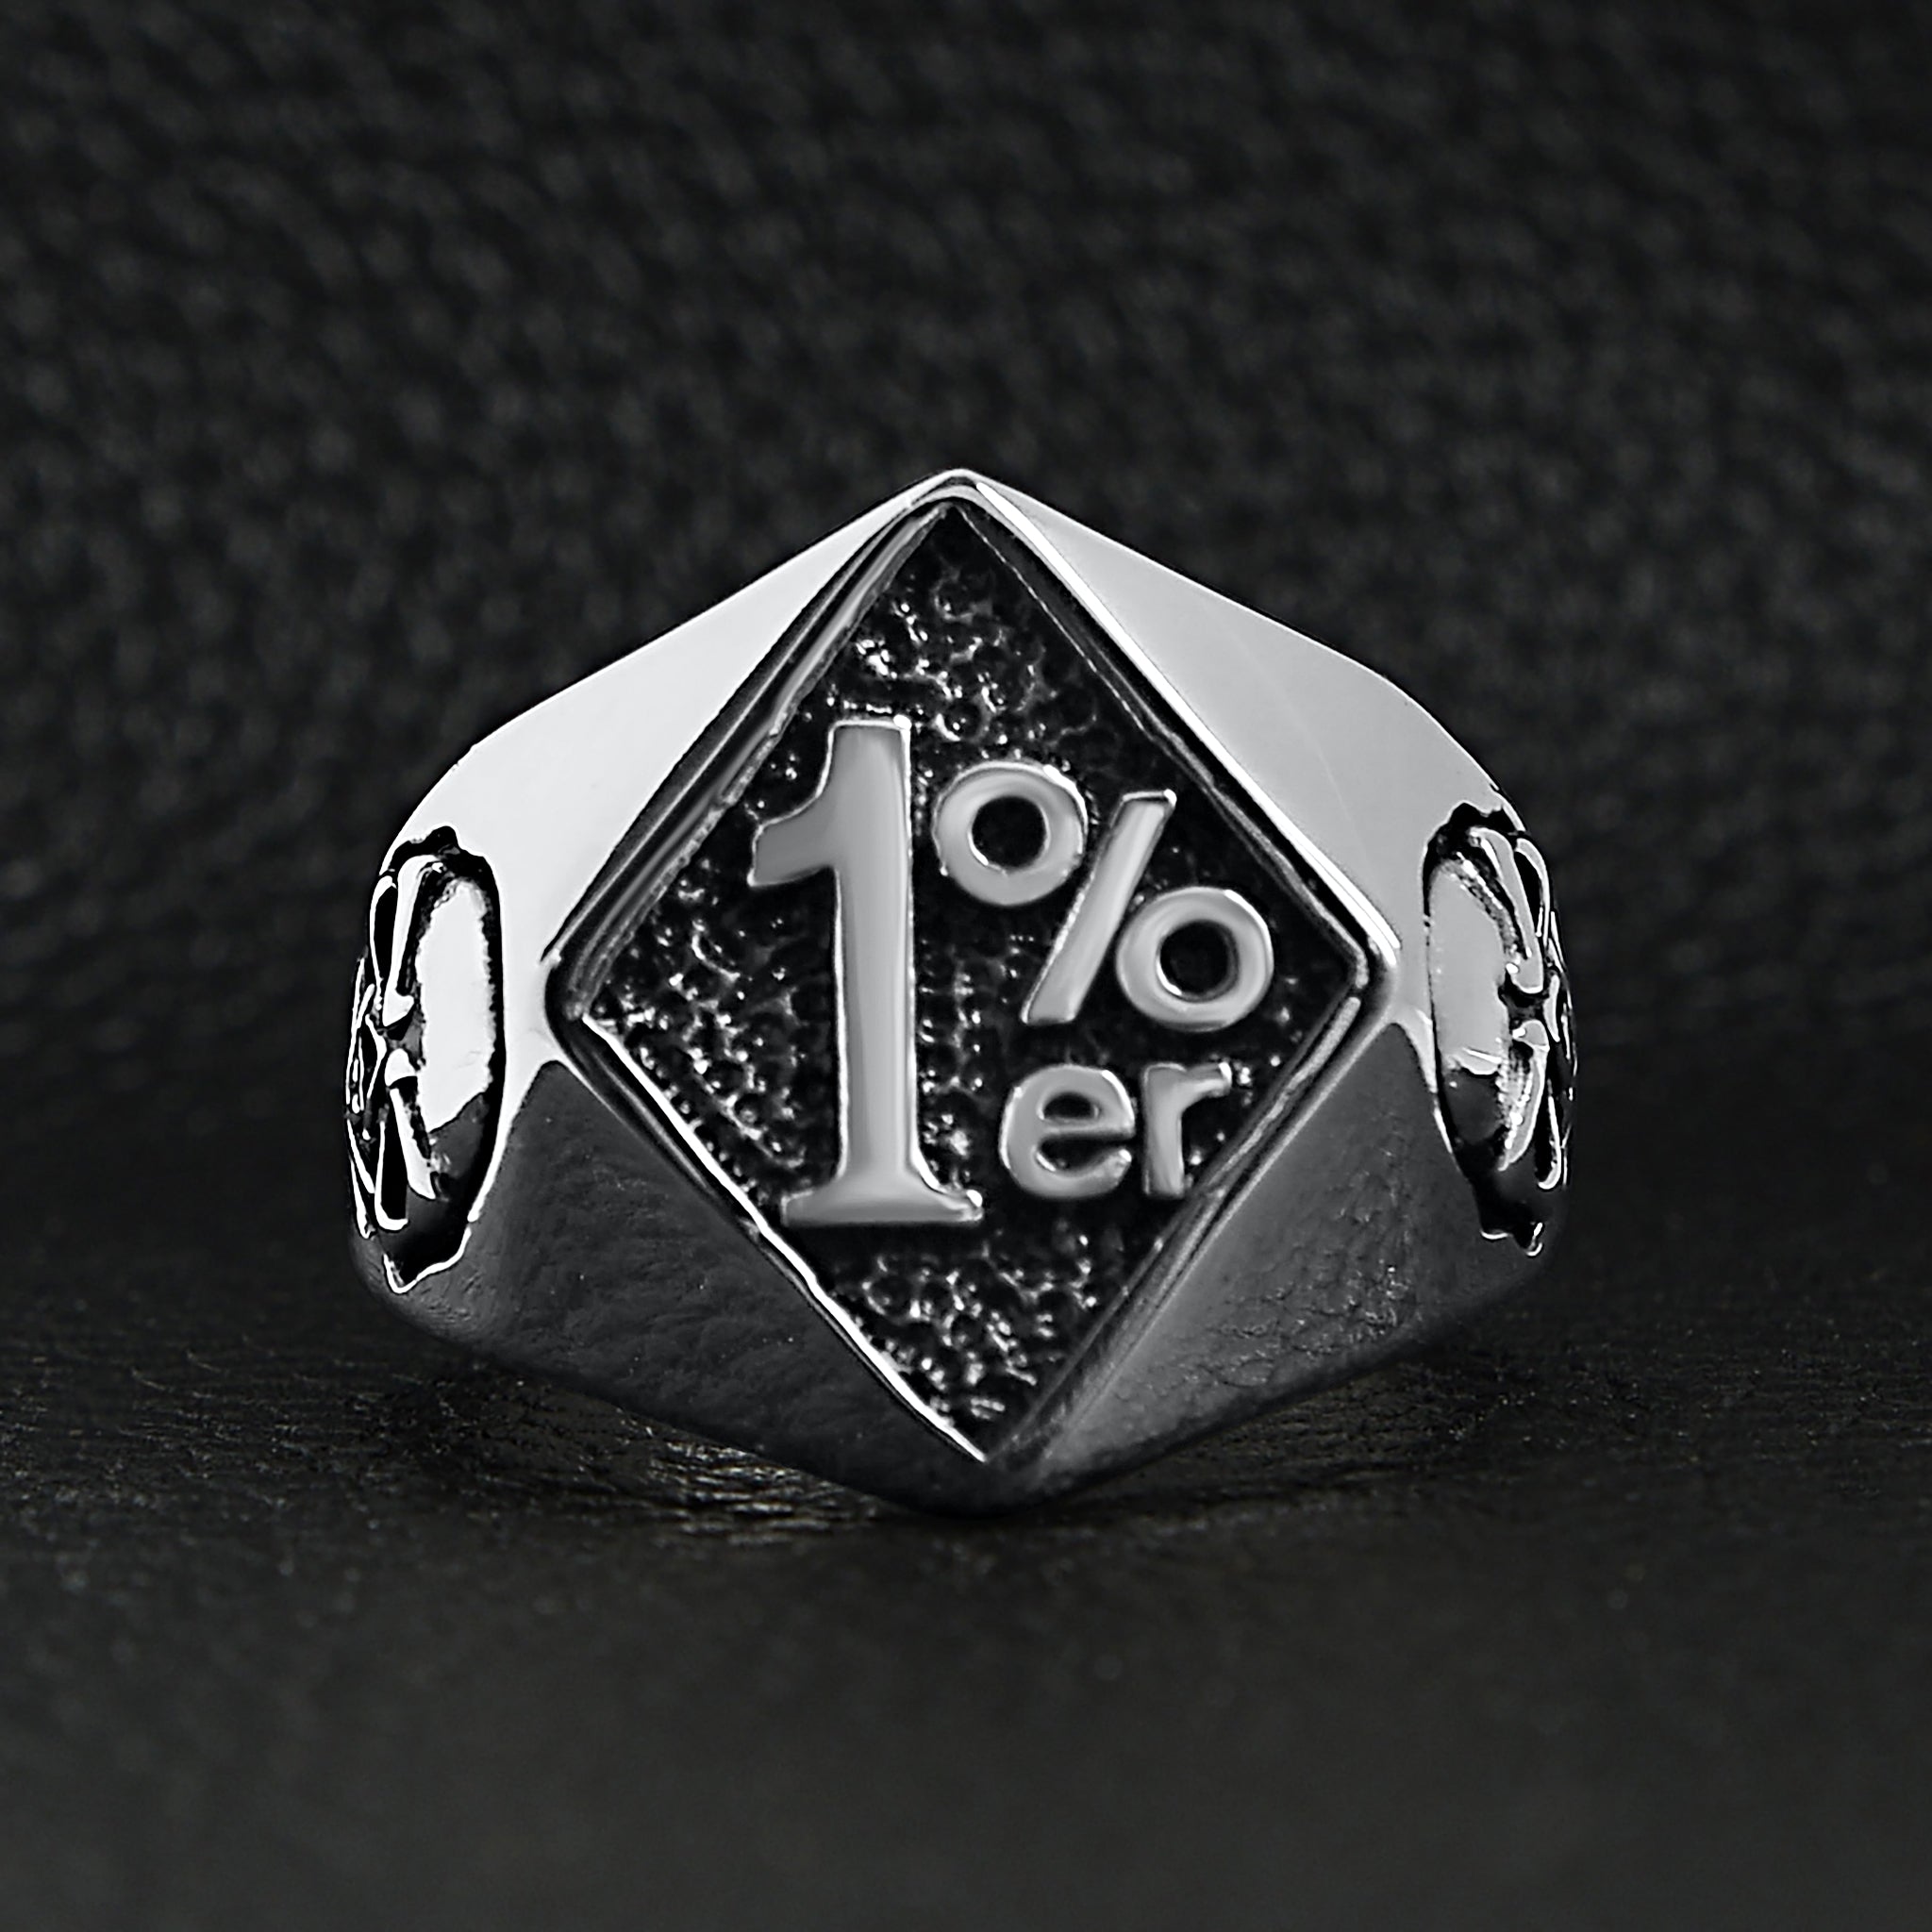 1%er Stainless Steel Signet Ring with Skull Accents - Durable and Hypoallergenic Bijou Her